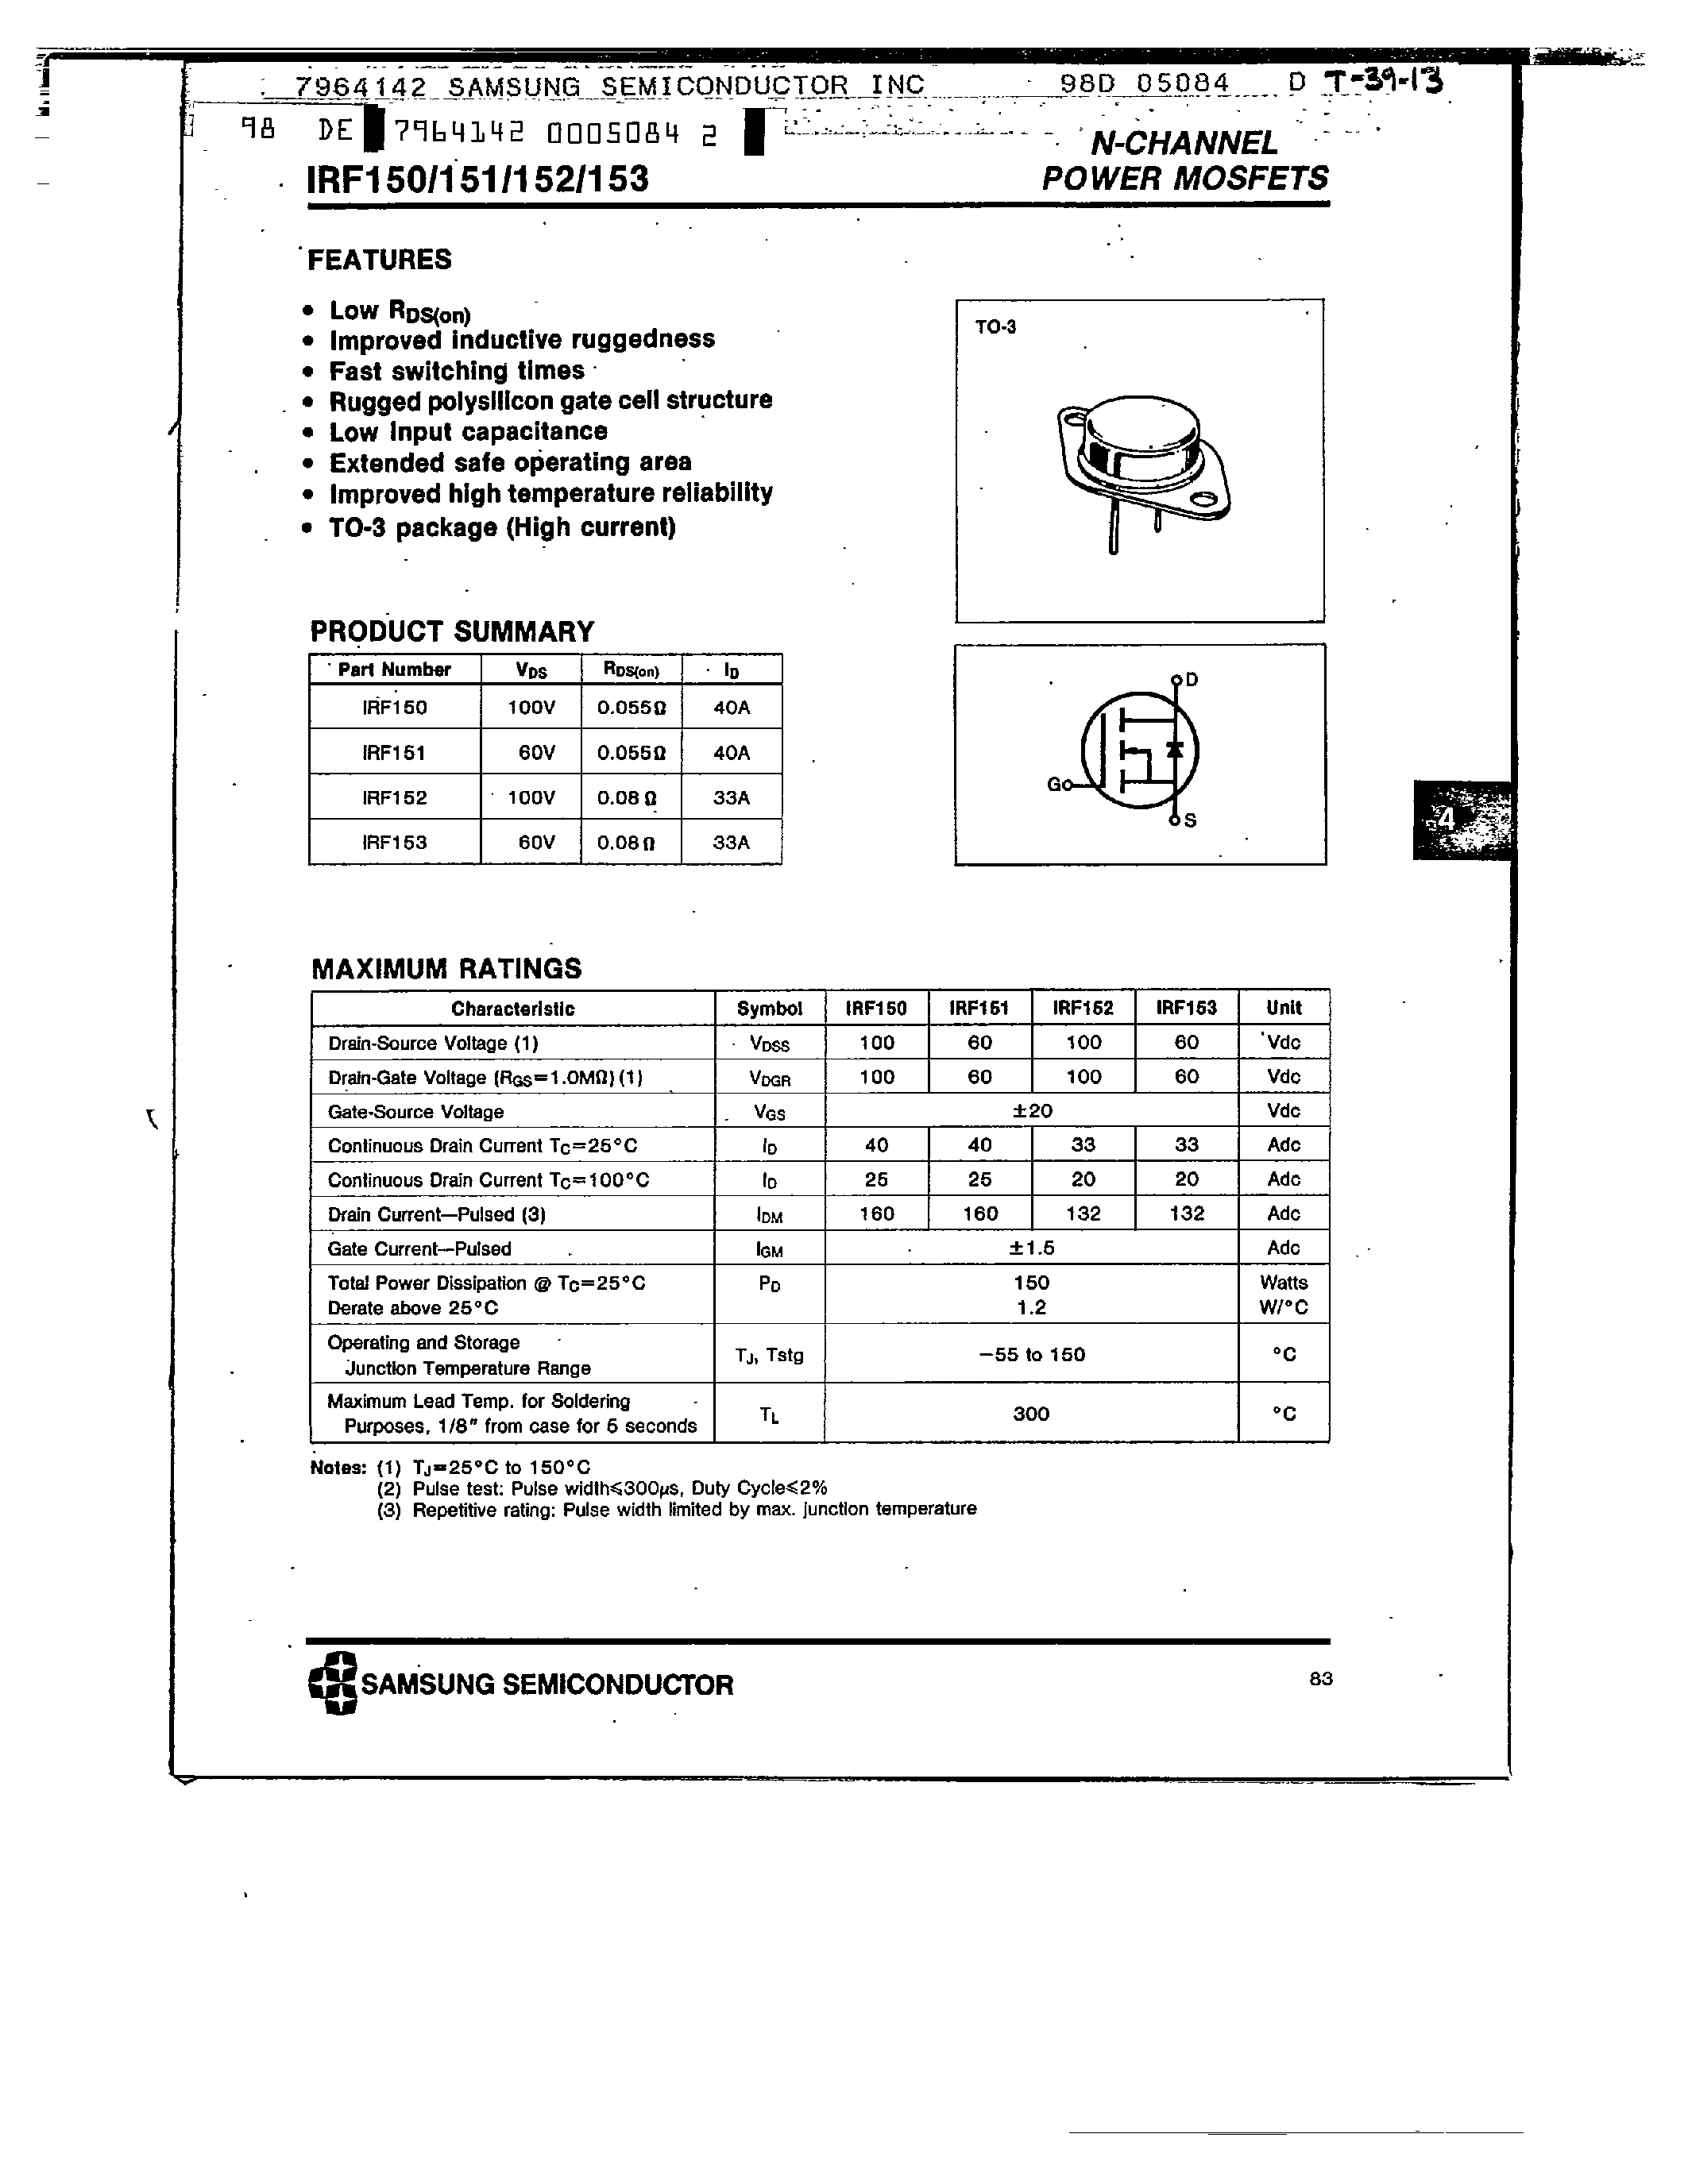 Datasheet IRF153 - N-CHANNEL POWER MOSFETS page 1